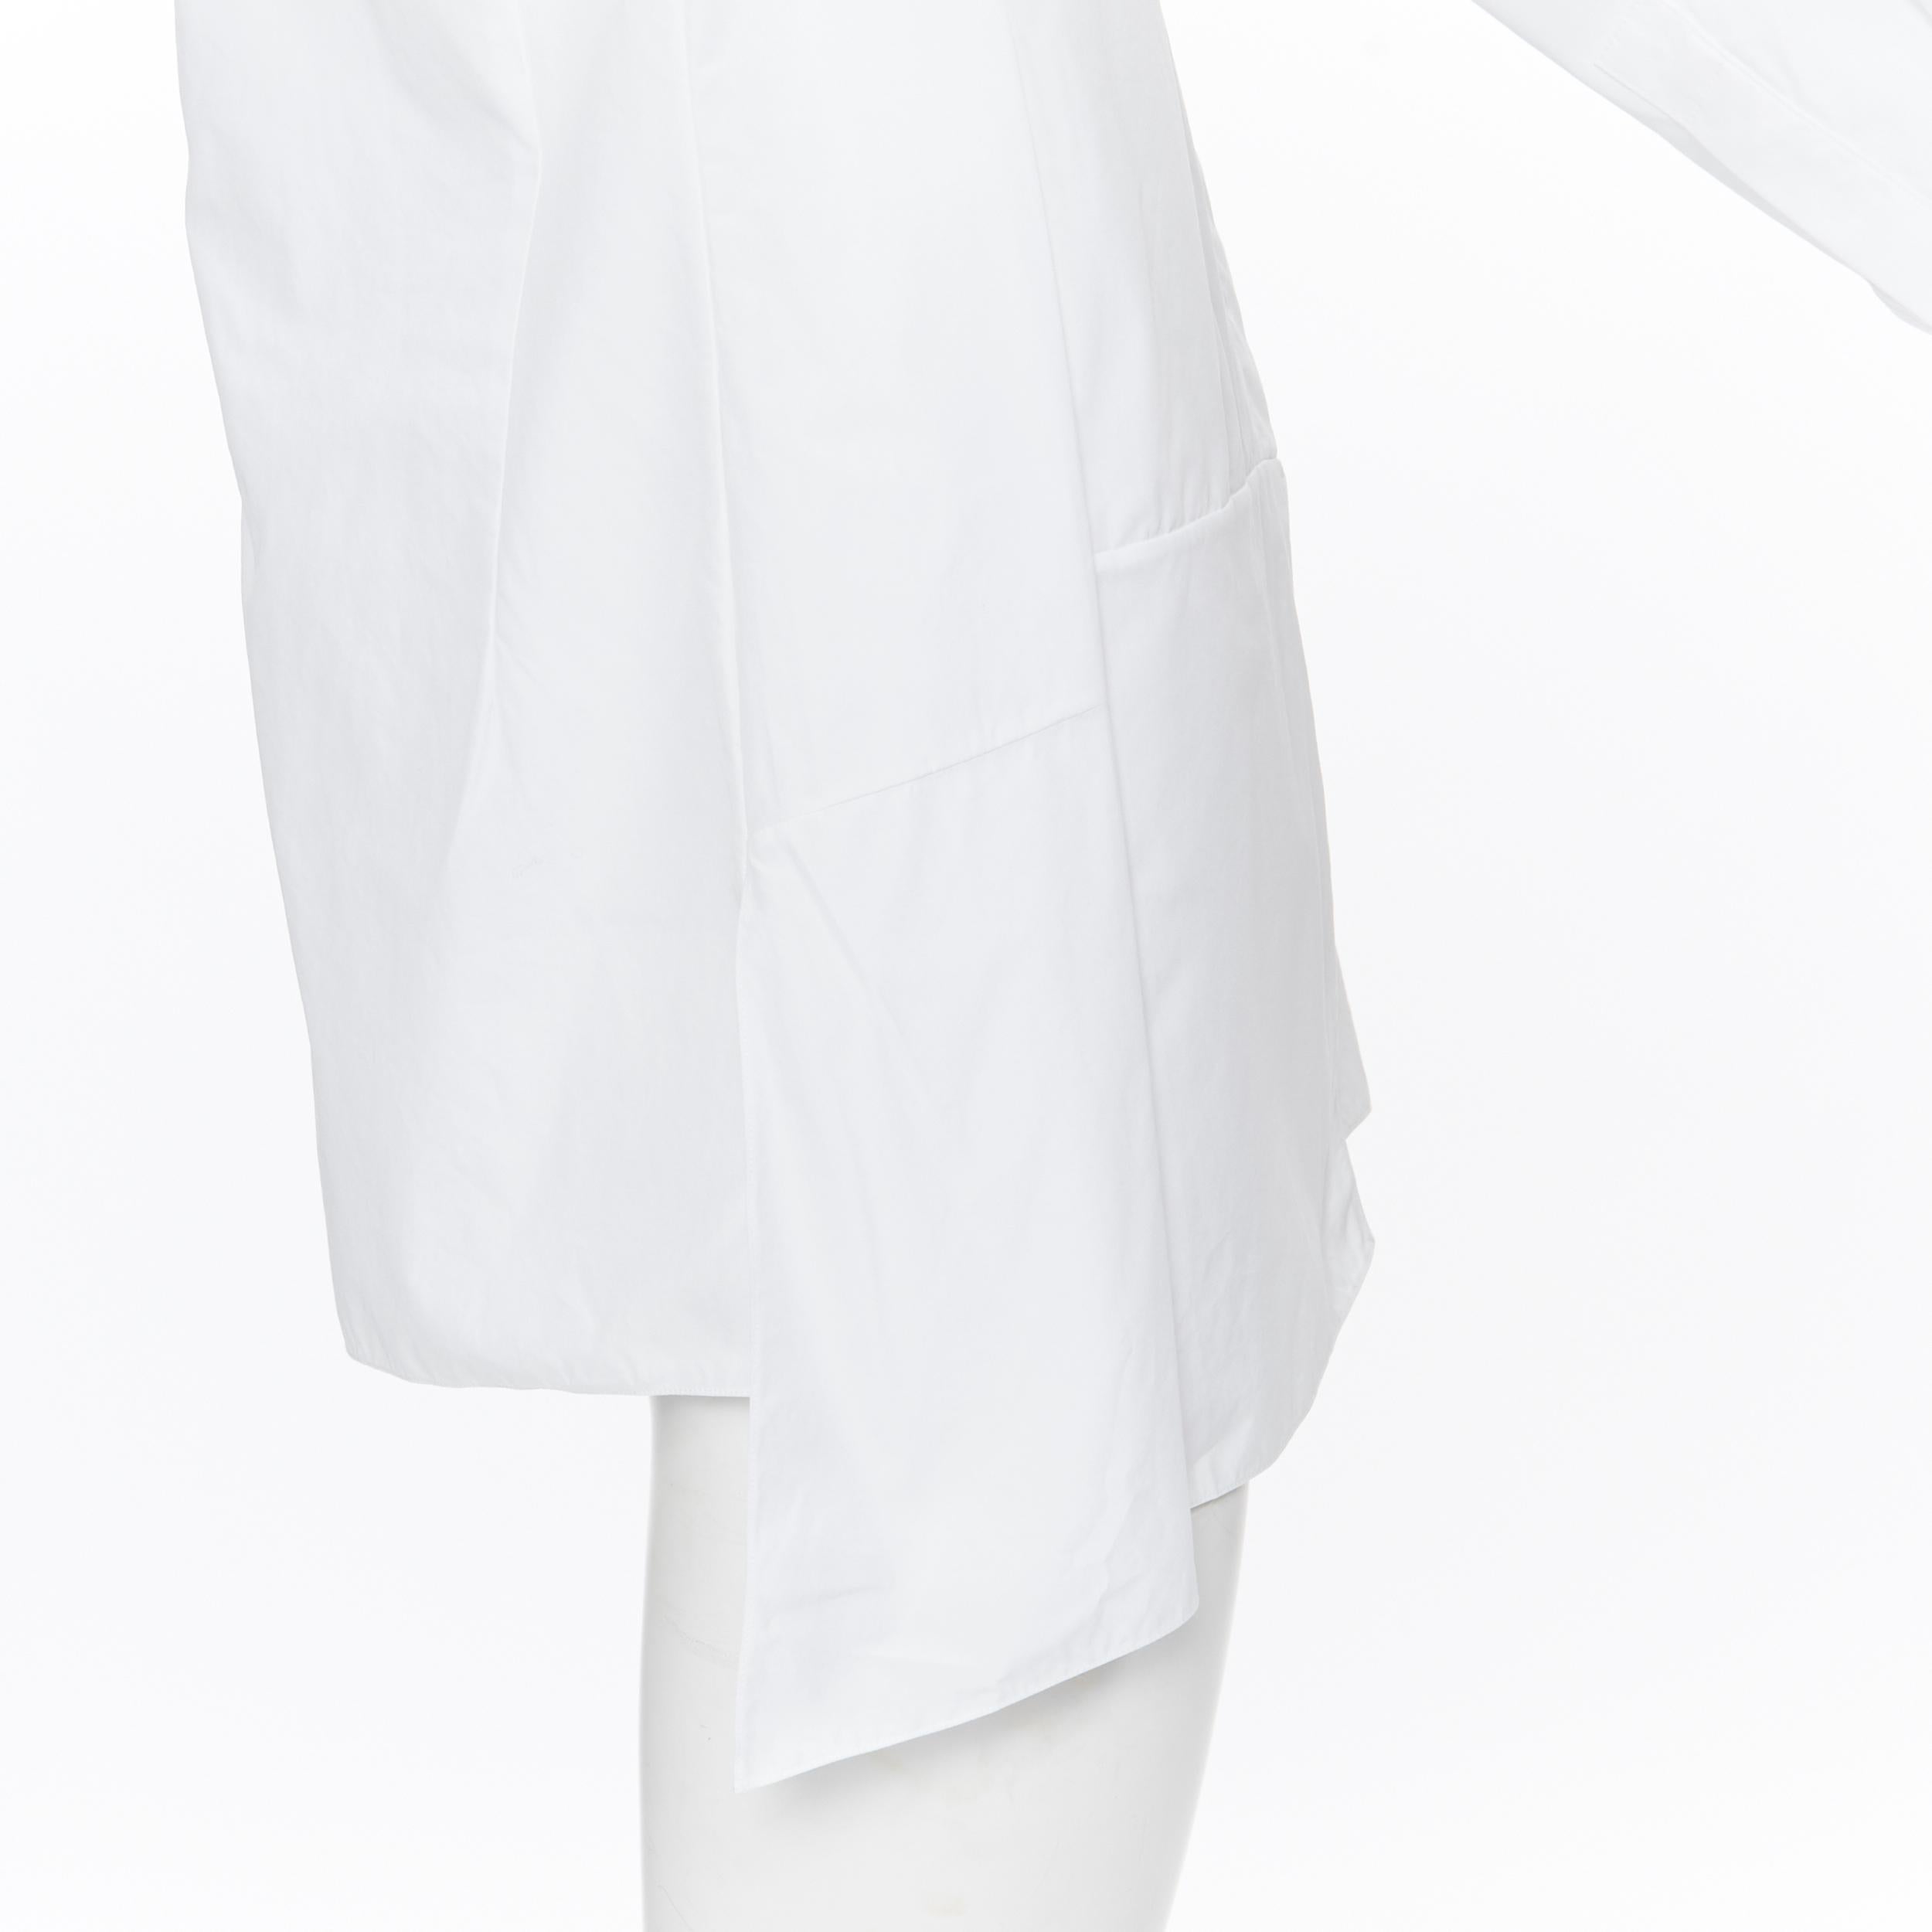 JIL SANDER white cotton minimalist high low panel insert button up shirt FR32
Brand: Jil Sander
Model Name / Style: Cotton shirt
Material: Cotton
Color: White
Pattern: Solid
Closure: Button
Extra Detail: Concealed button front closure. Insert panel